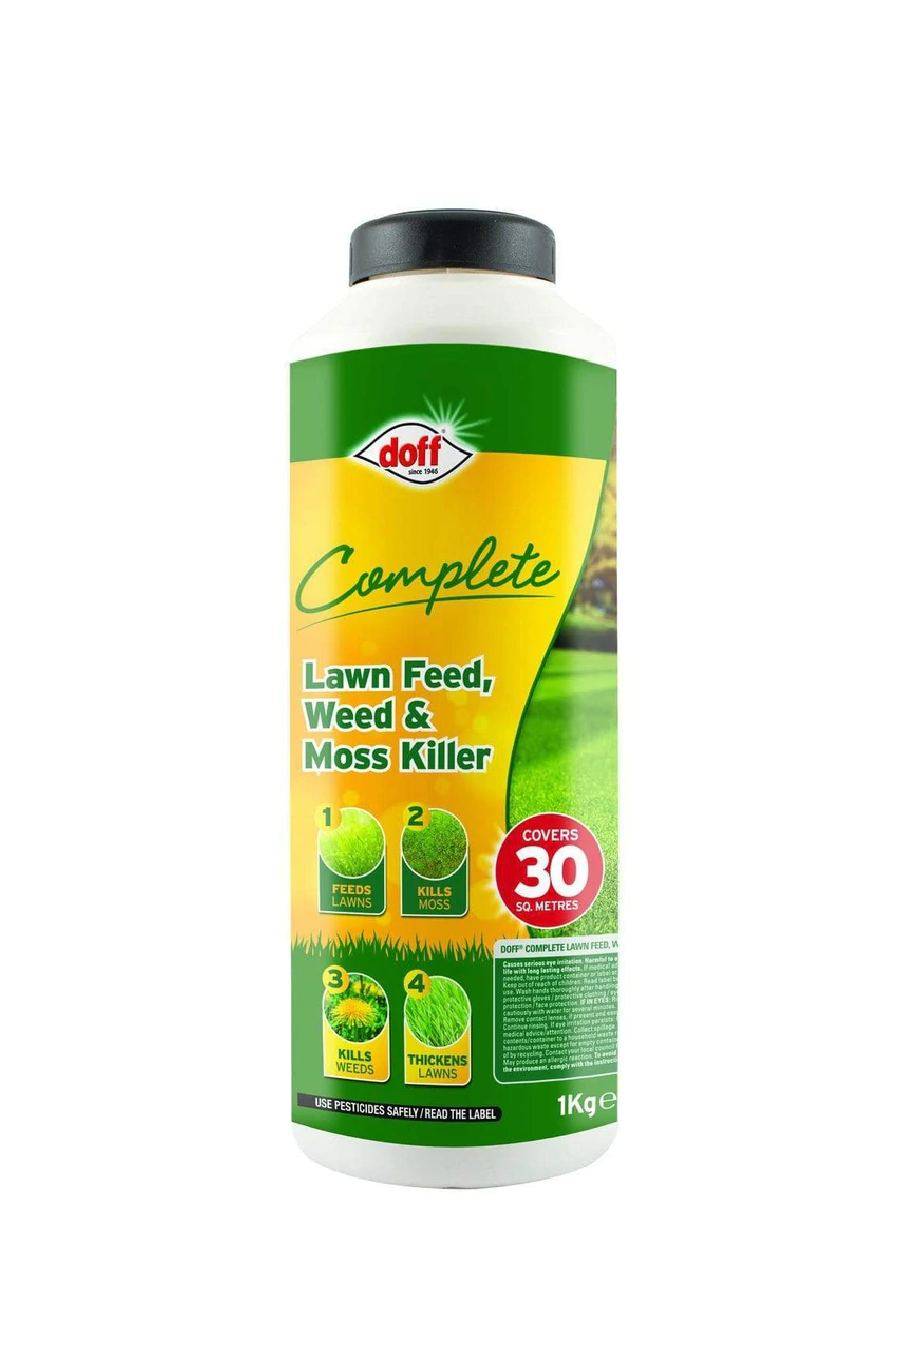 Doff 4 In 1 Complete Lawn Feed, Weed & Mosskiller | 1kg